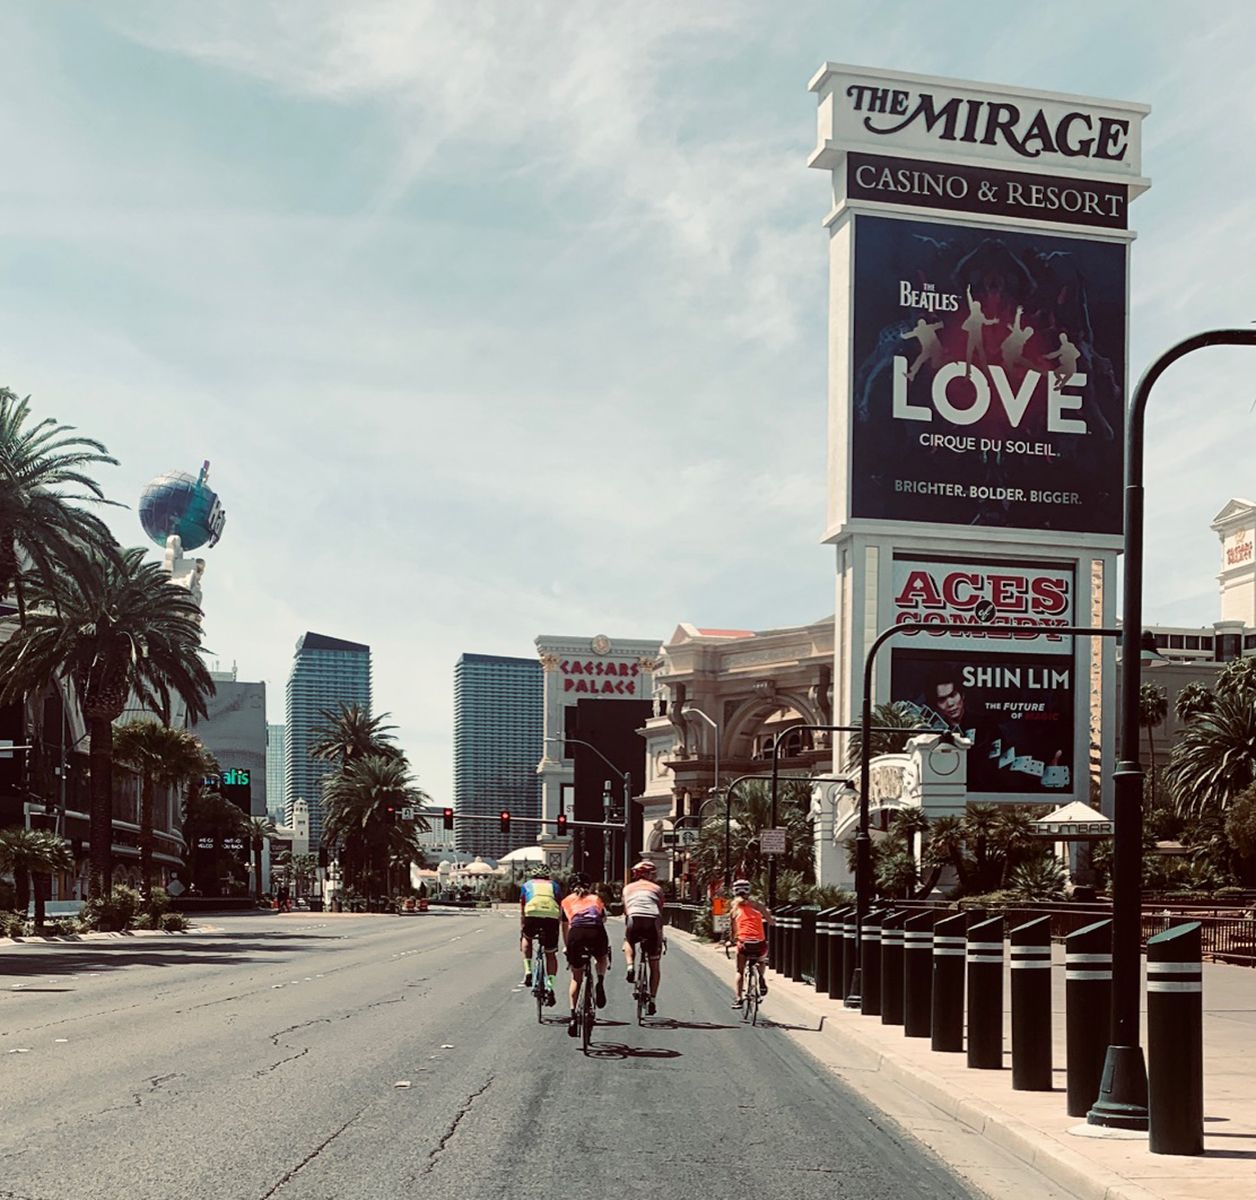 Cyclists riding bicycles on the Las Vegas strip